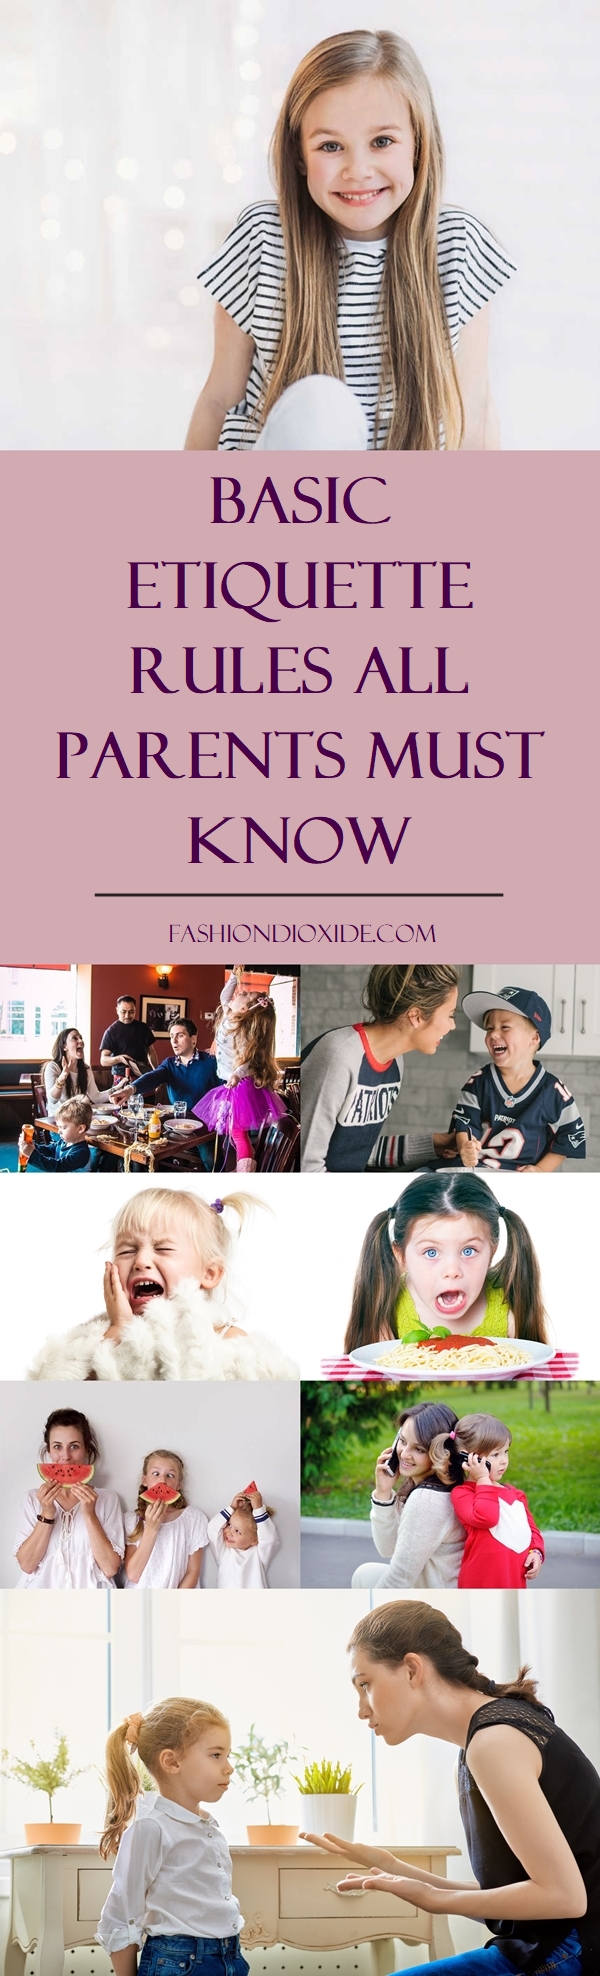 basic-etiquette-rules-all-parents-must-know